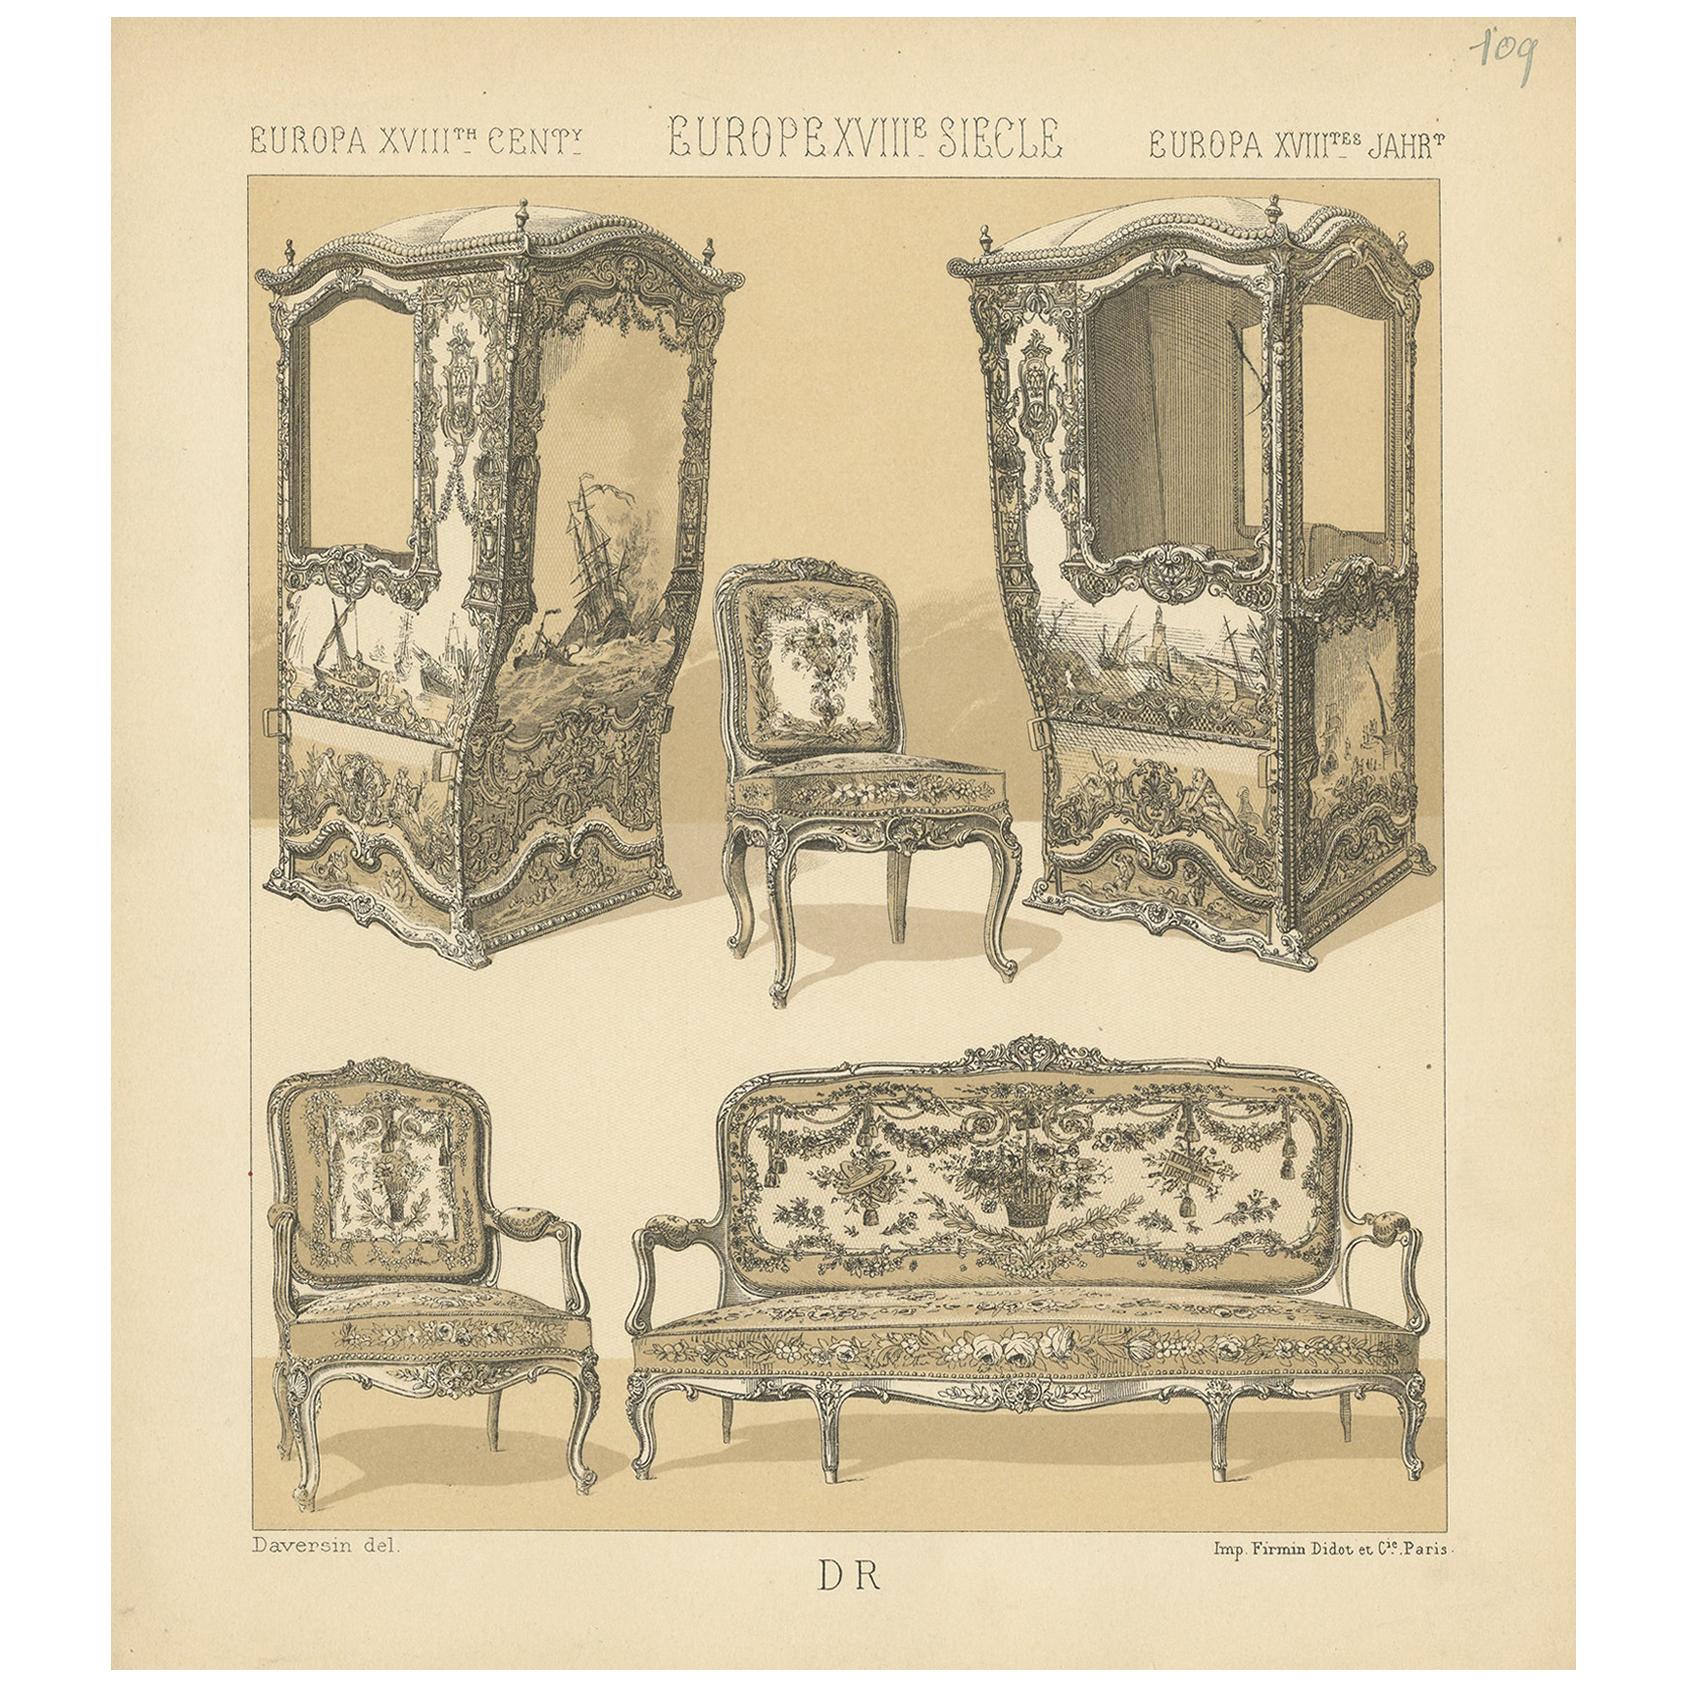 Pl. 109 Antique Print of European XVIIIth Century Furniture by Racinet For Sale